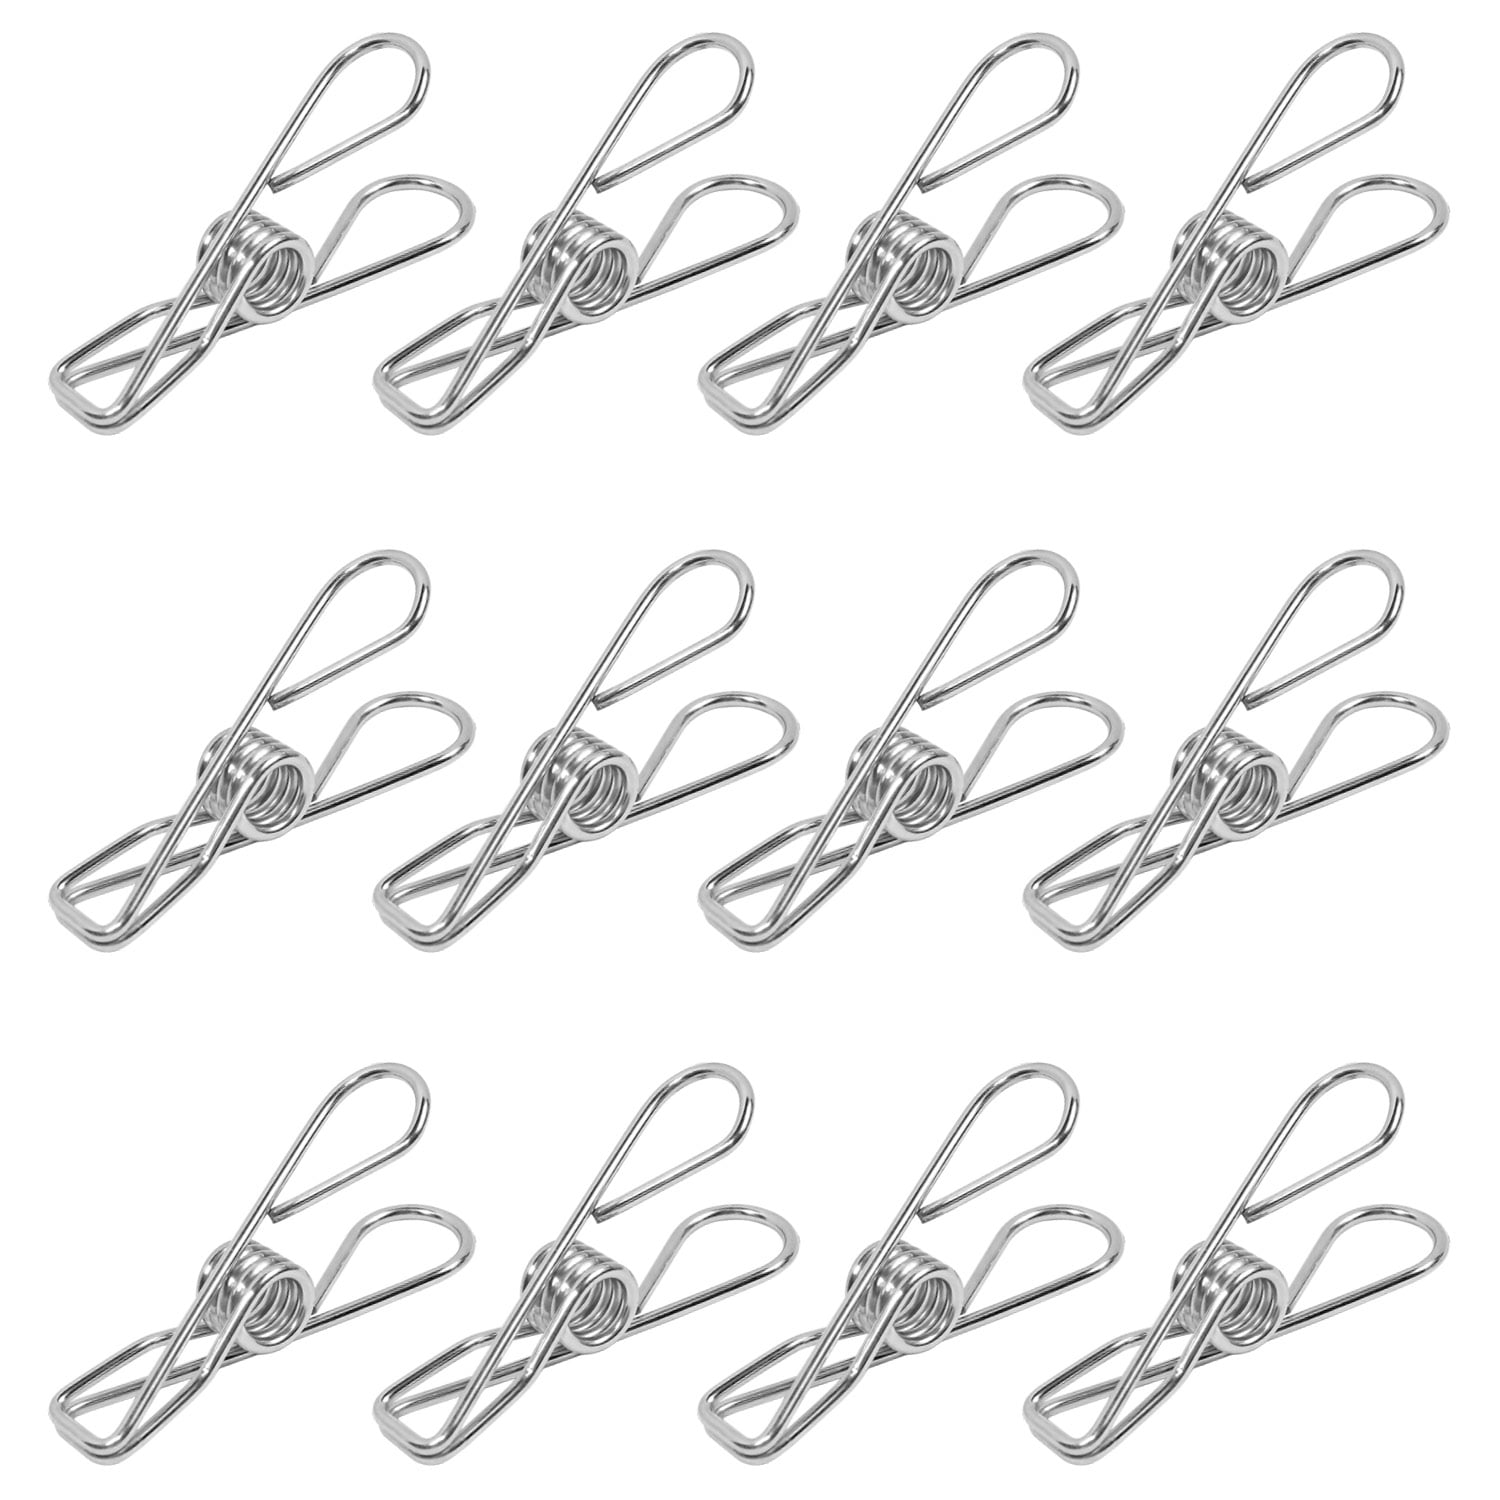 2" Clothespins Stainless Steel Clips 48 PCS Metal Cord Utility ClipsMulti-P 